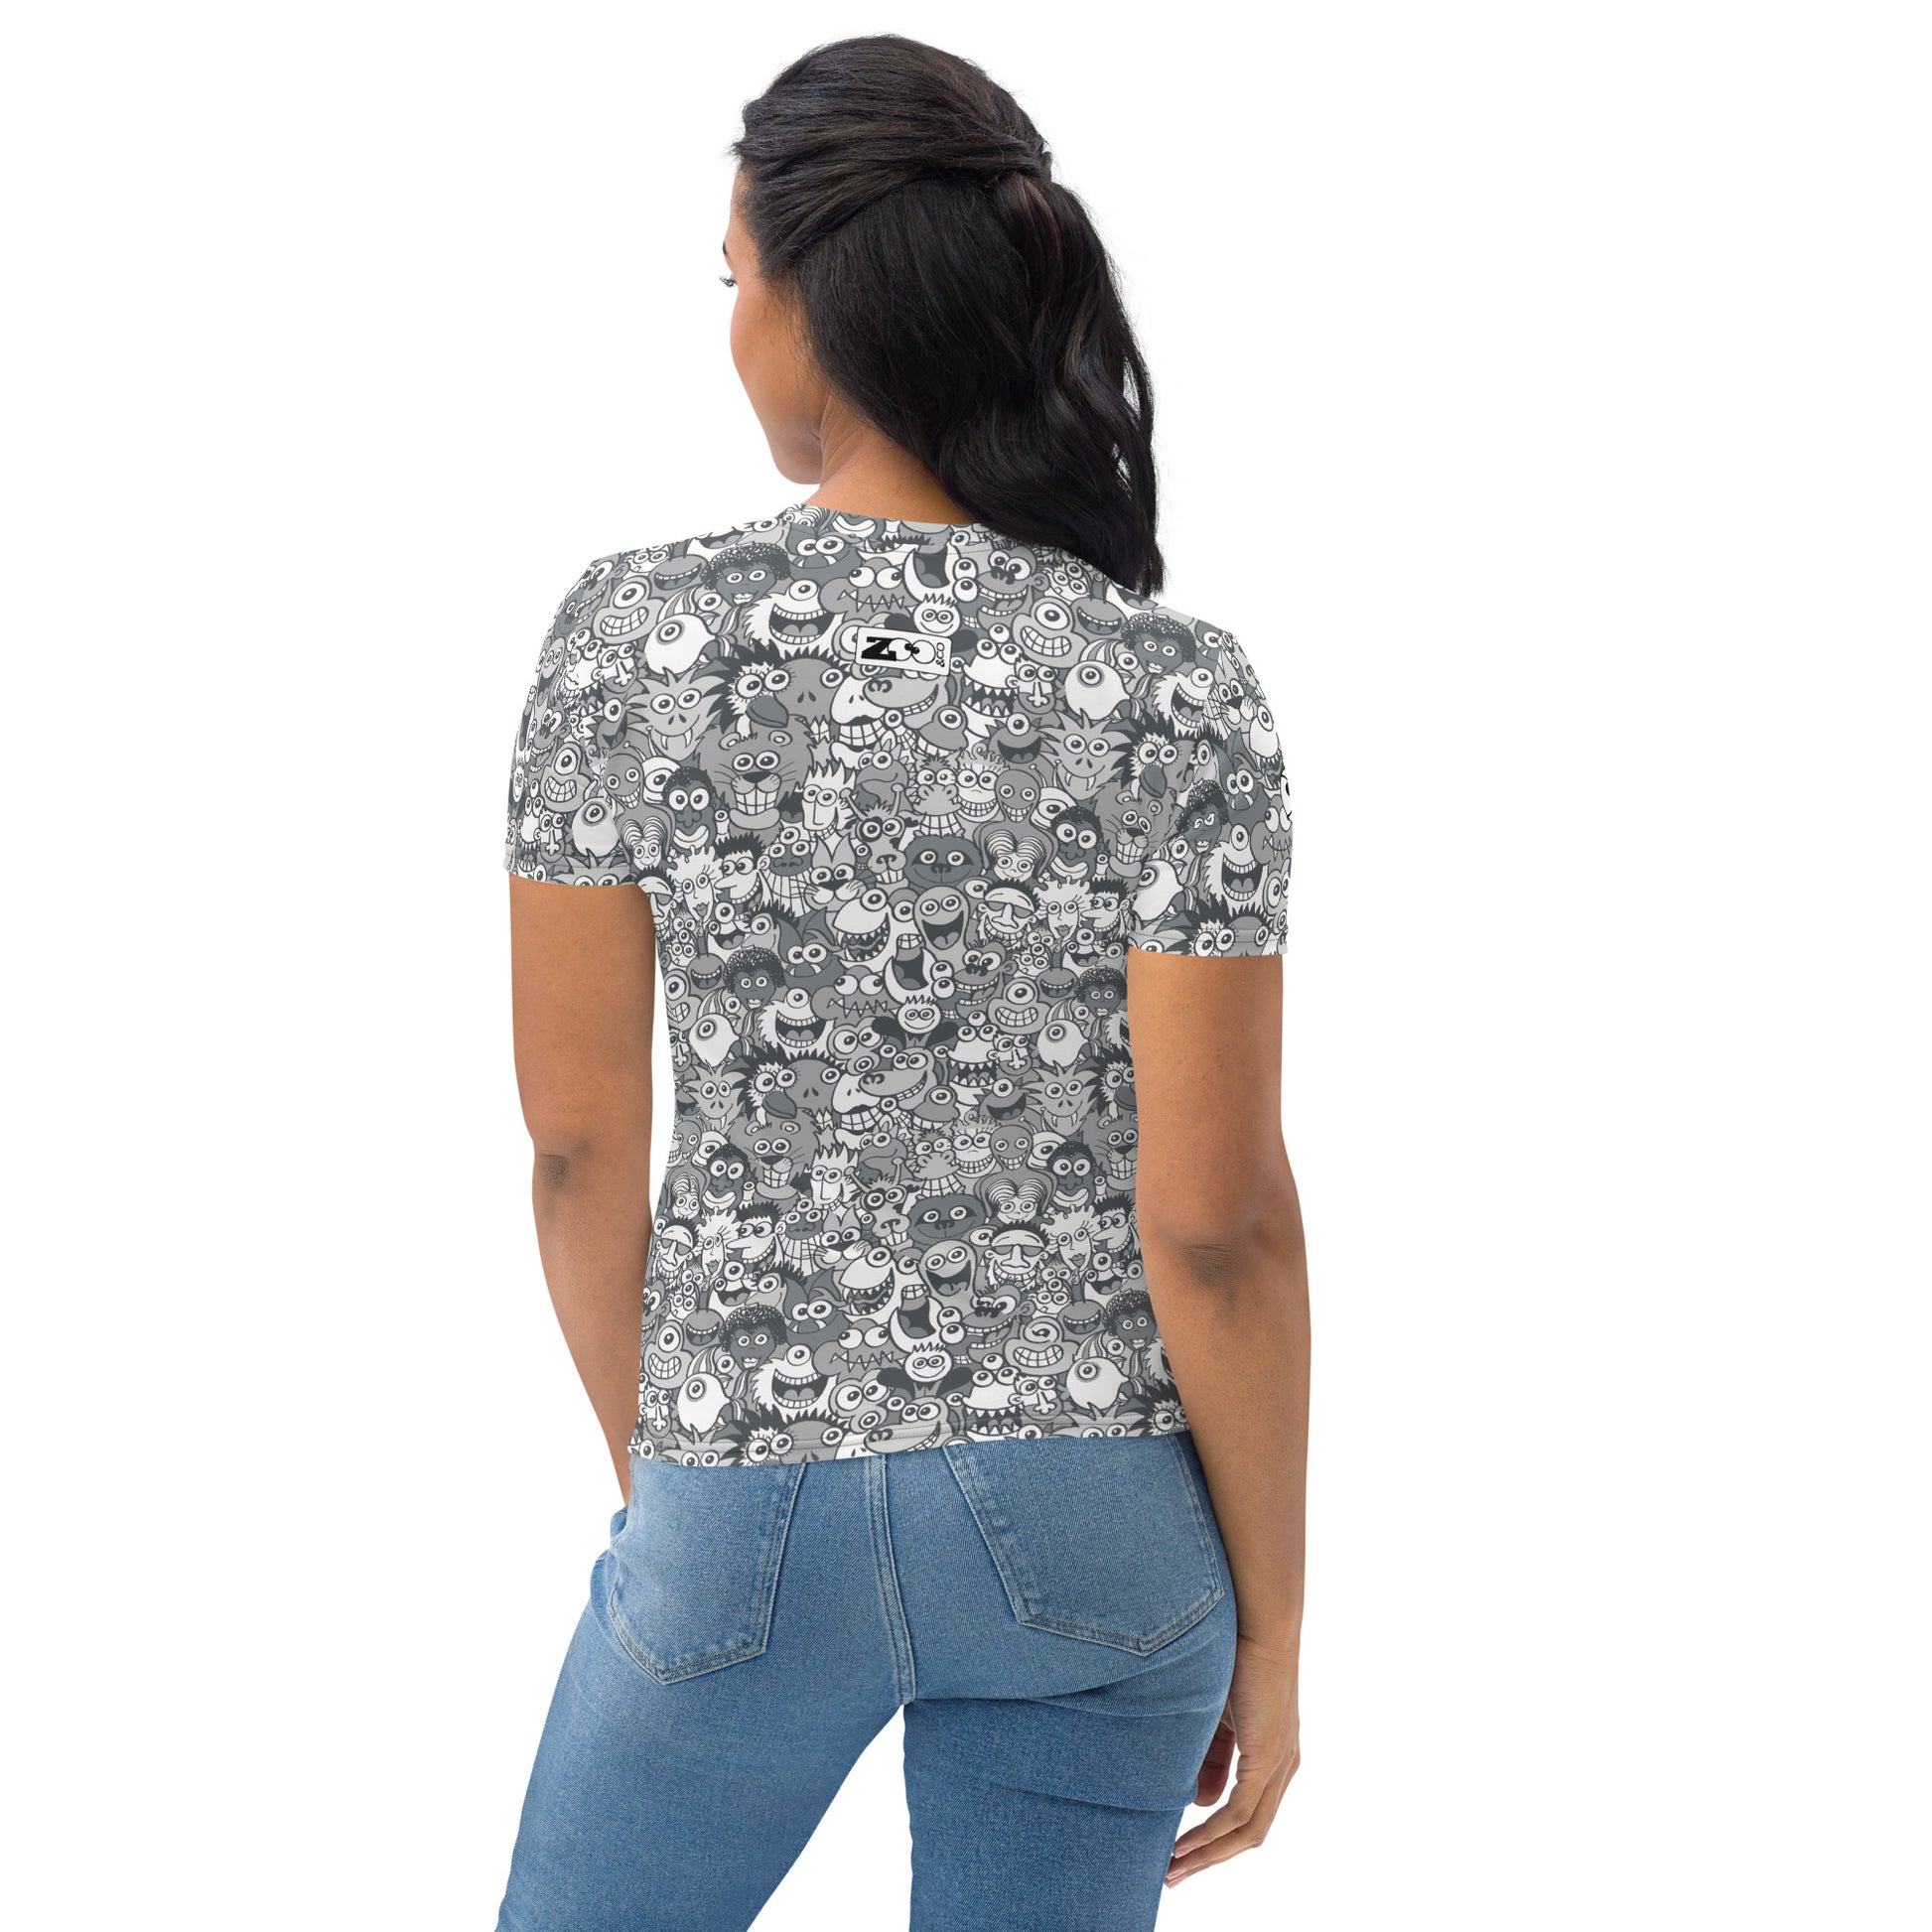 Find the gray man in the gray crowd of this gray world Women's T-shirt. Back view